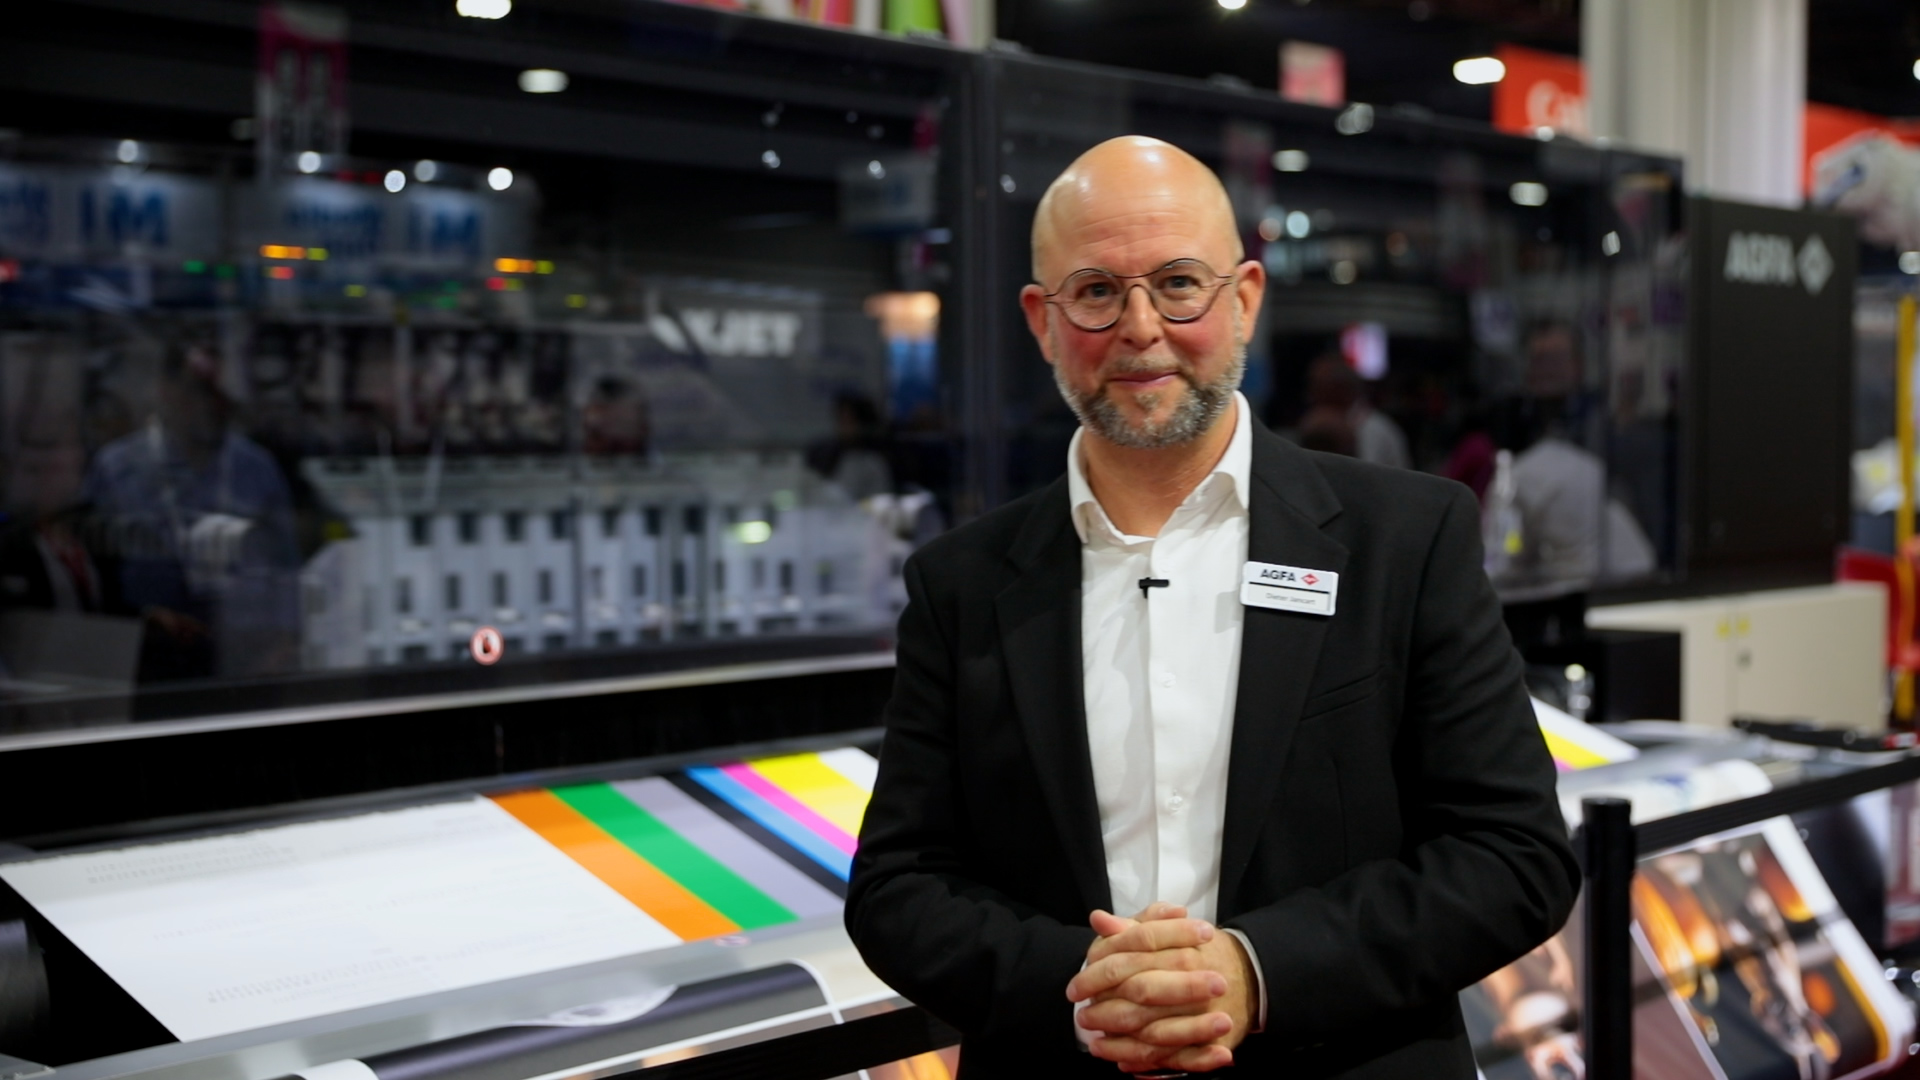 Business Update: Agfa’s Hardware, Software, and Consumables on Display